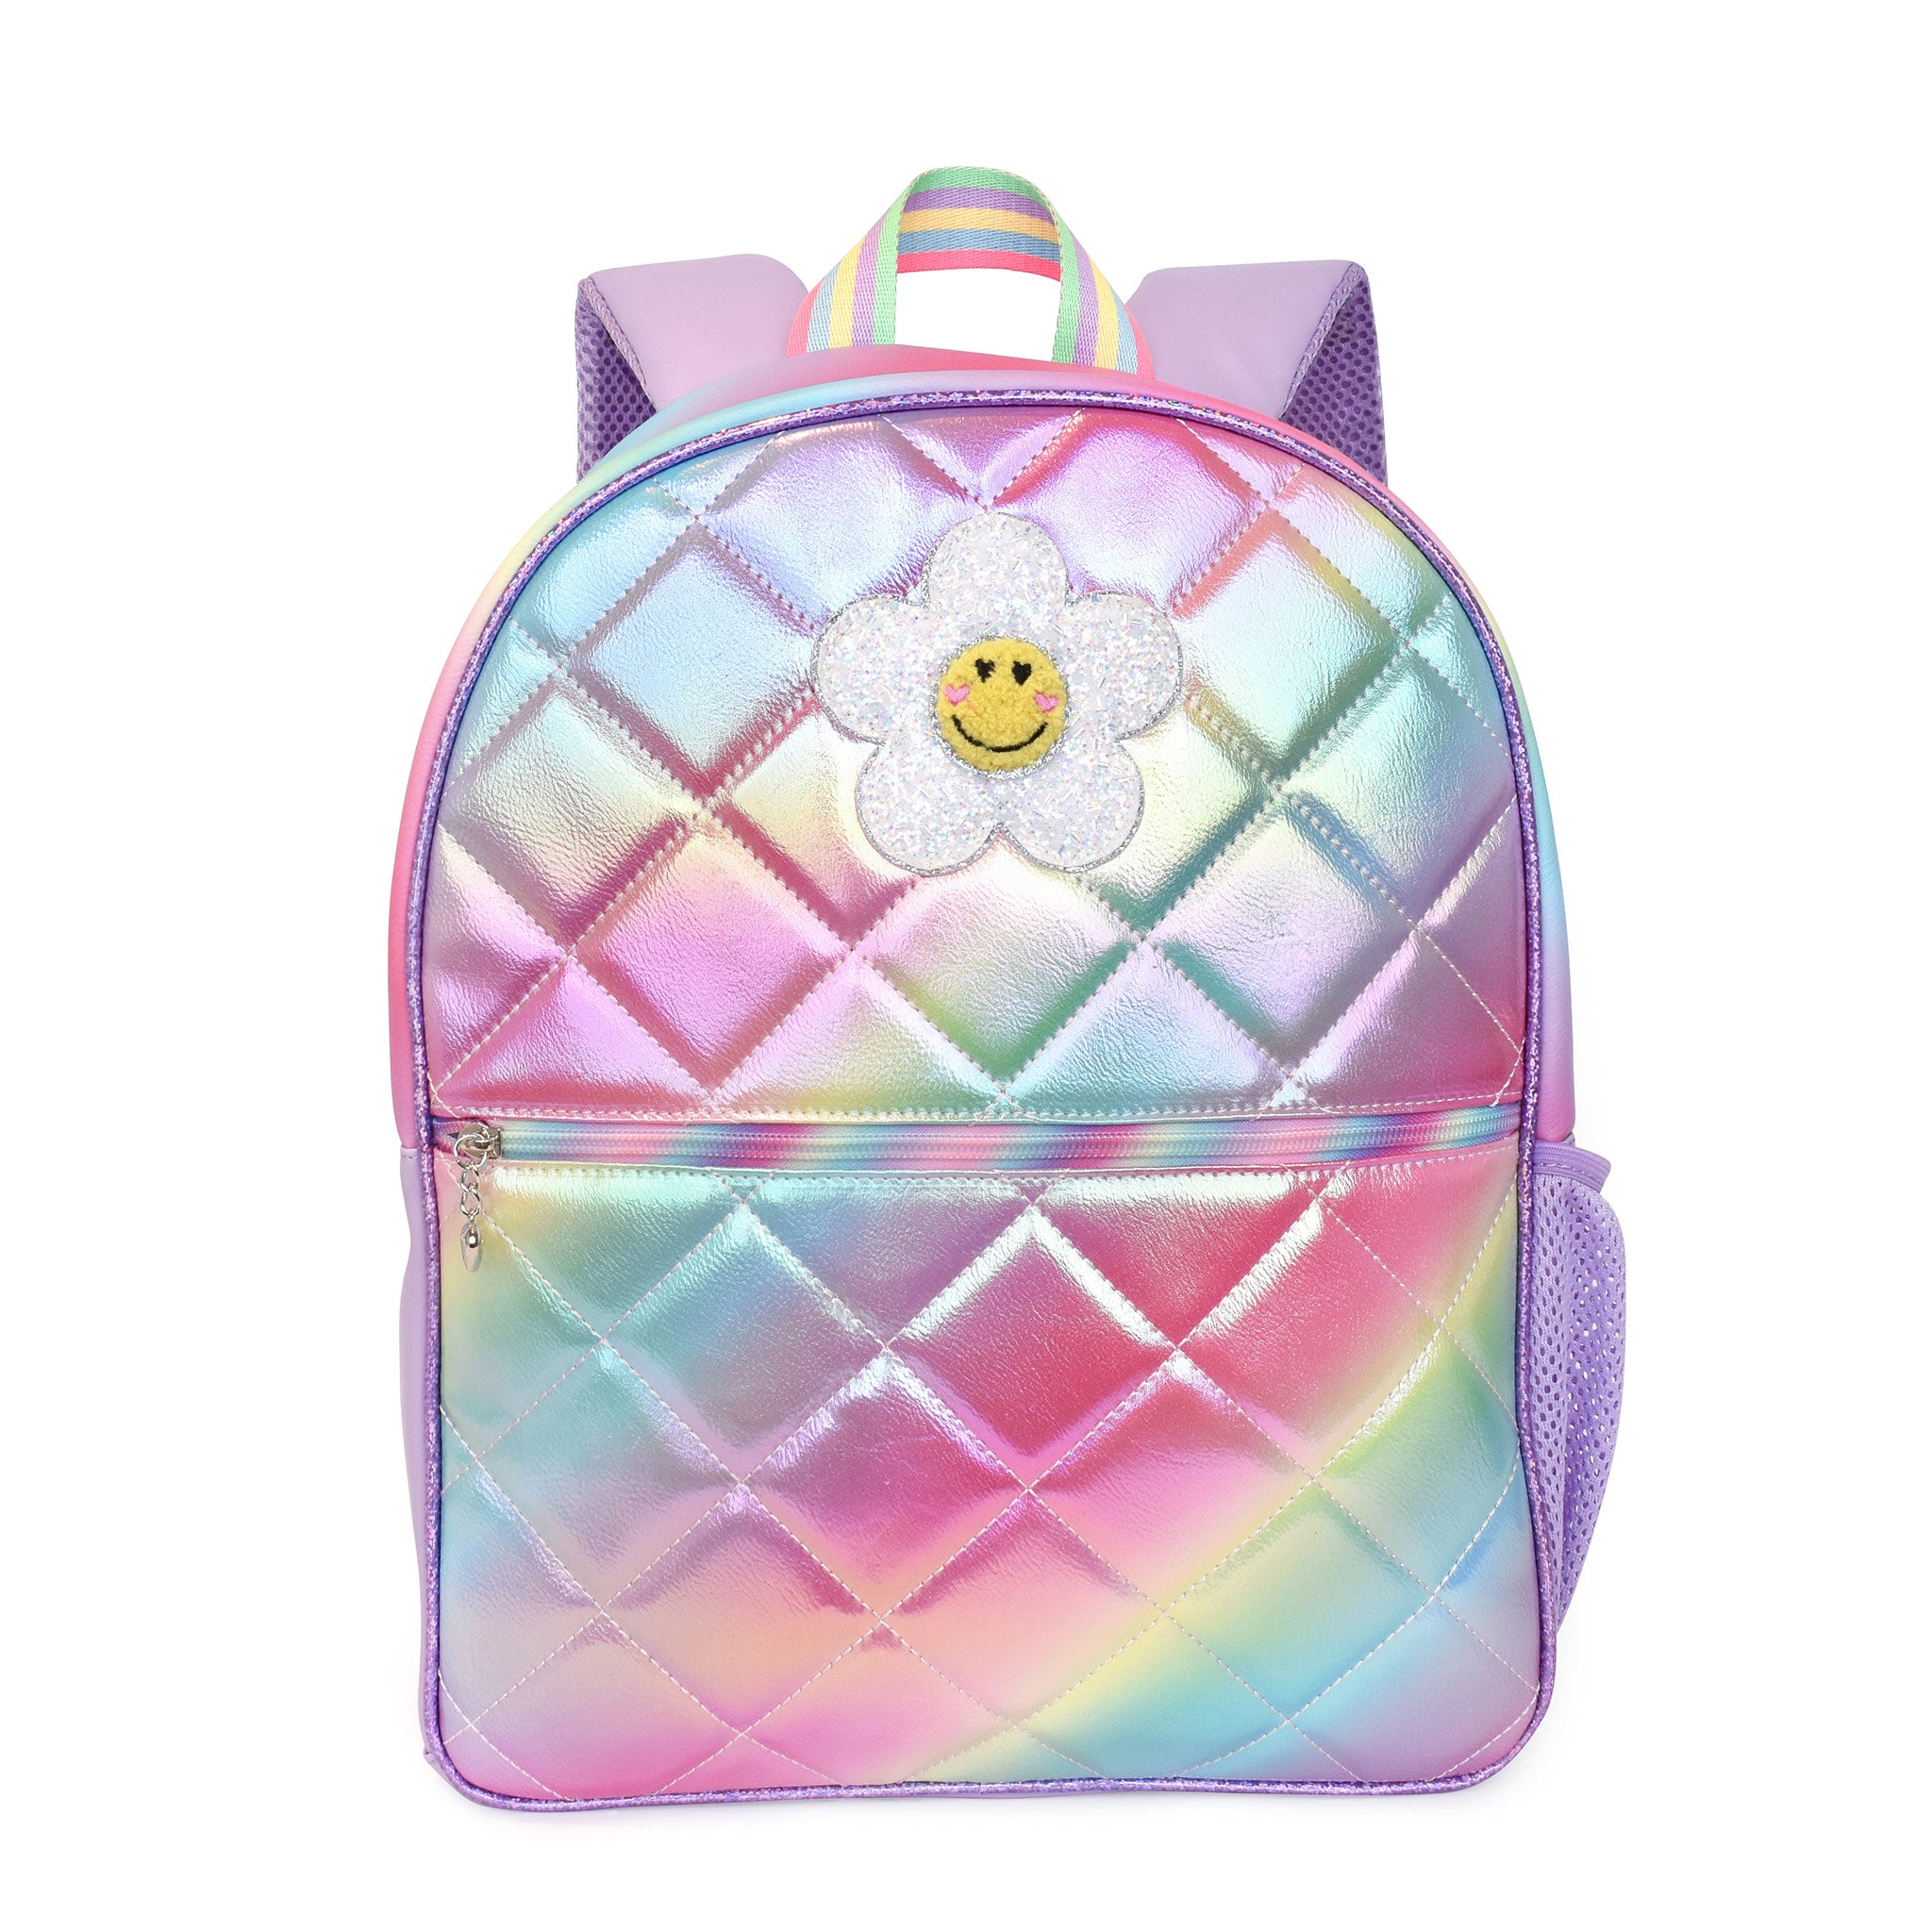 Front view of a rainbow metallic ombre quilted large backpack with a glitter daisy patch